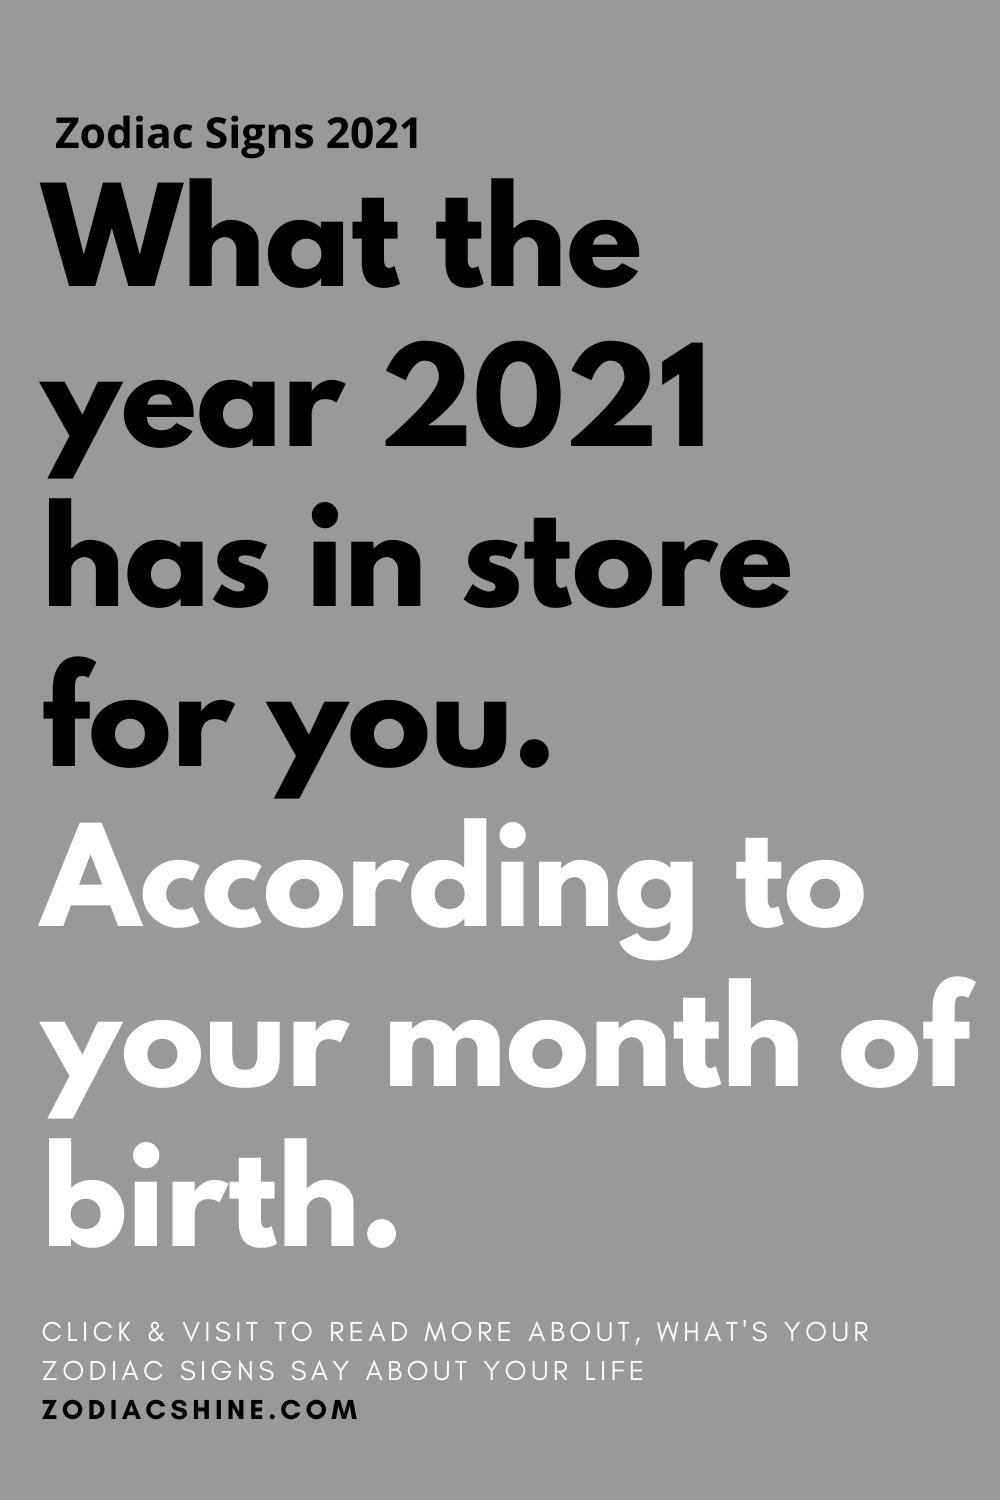 What the year 2021 has in store for you. According to your month of birth.